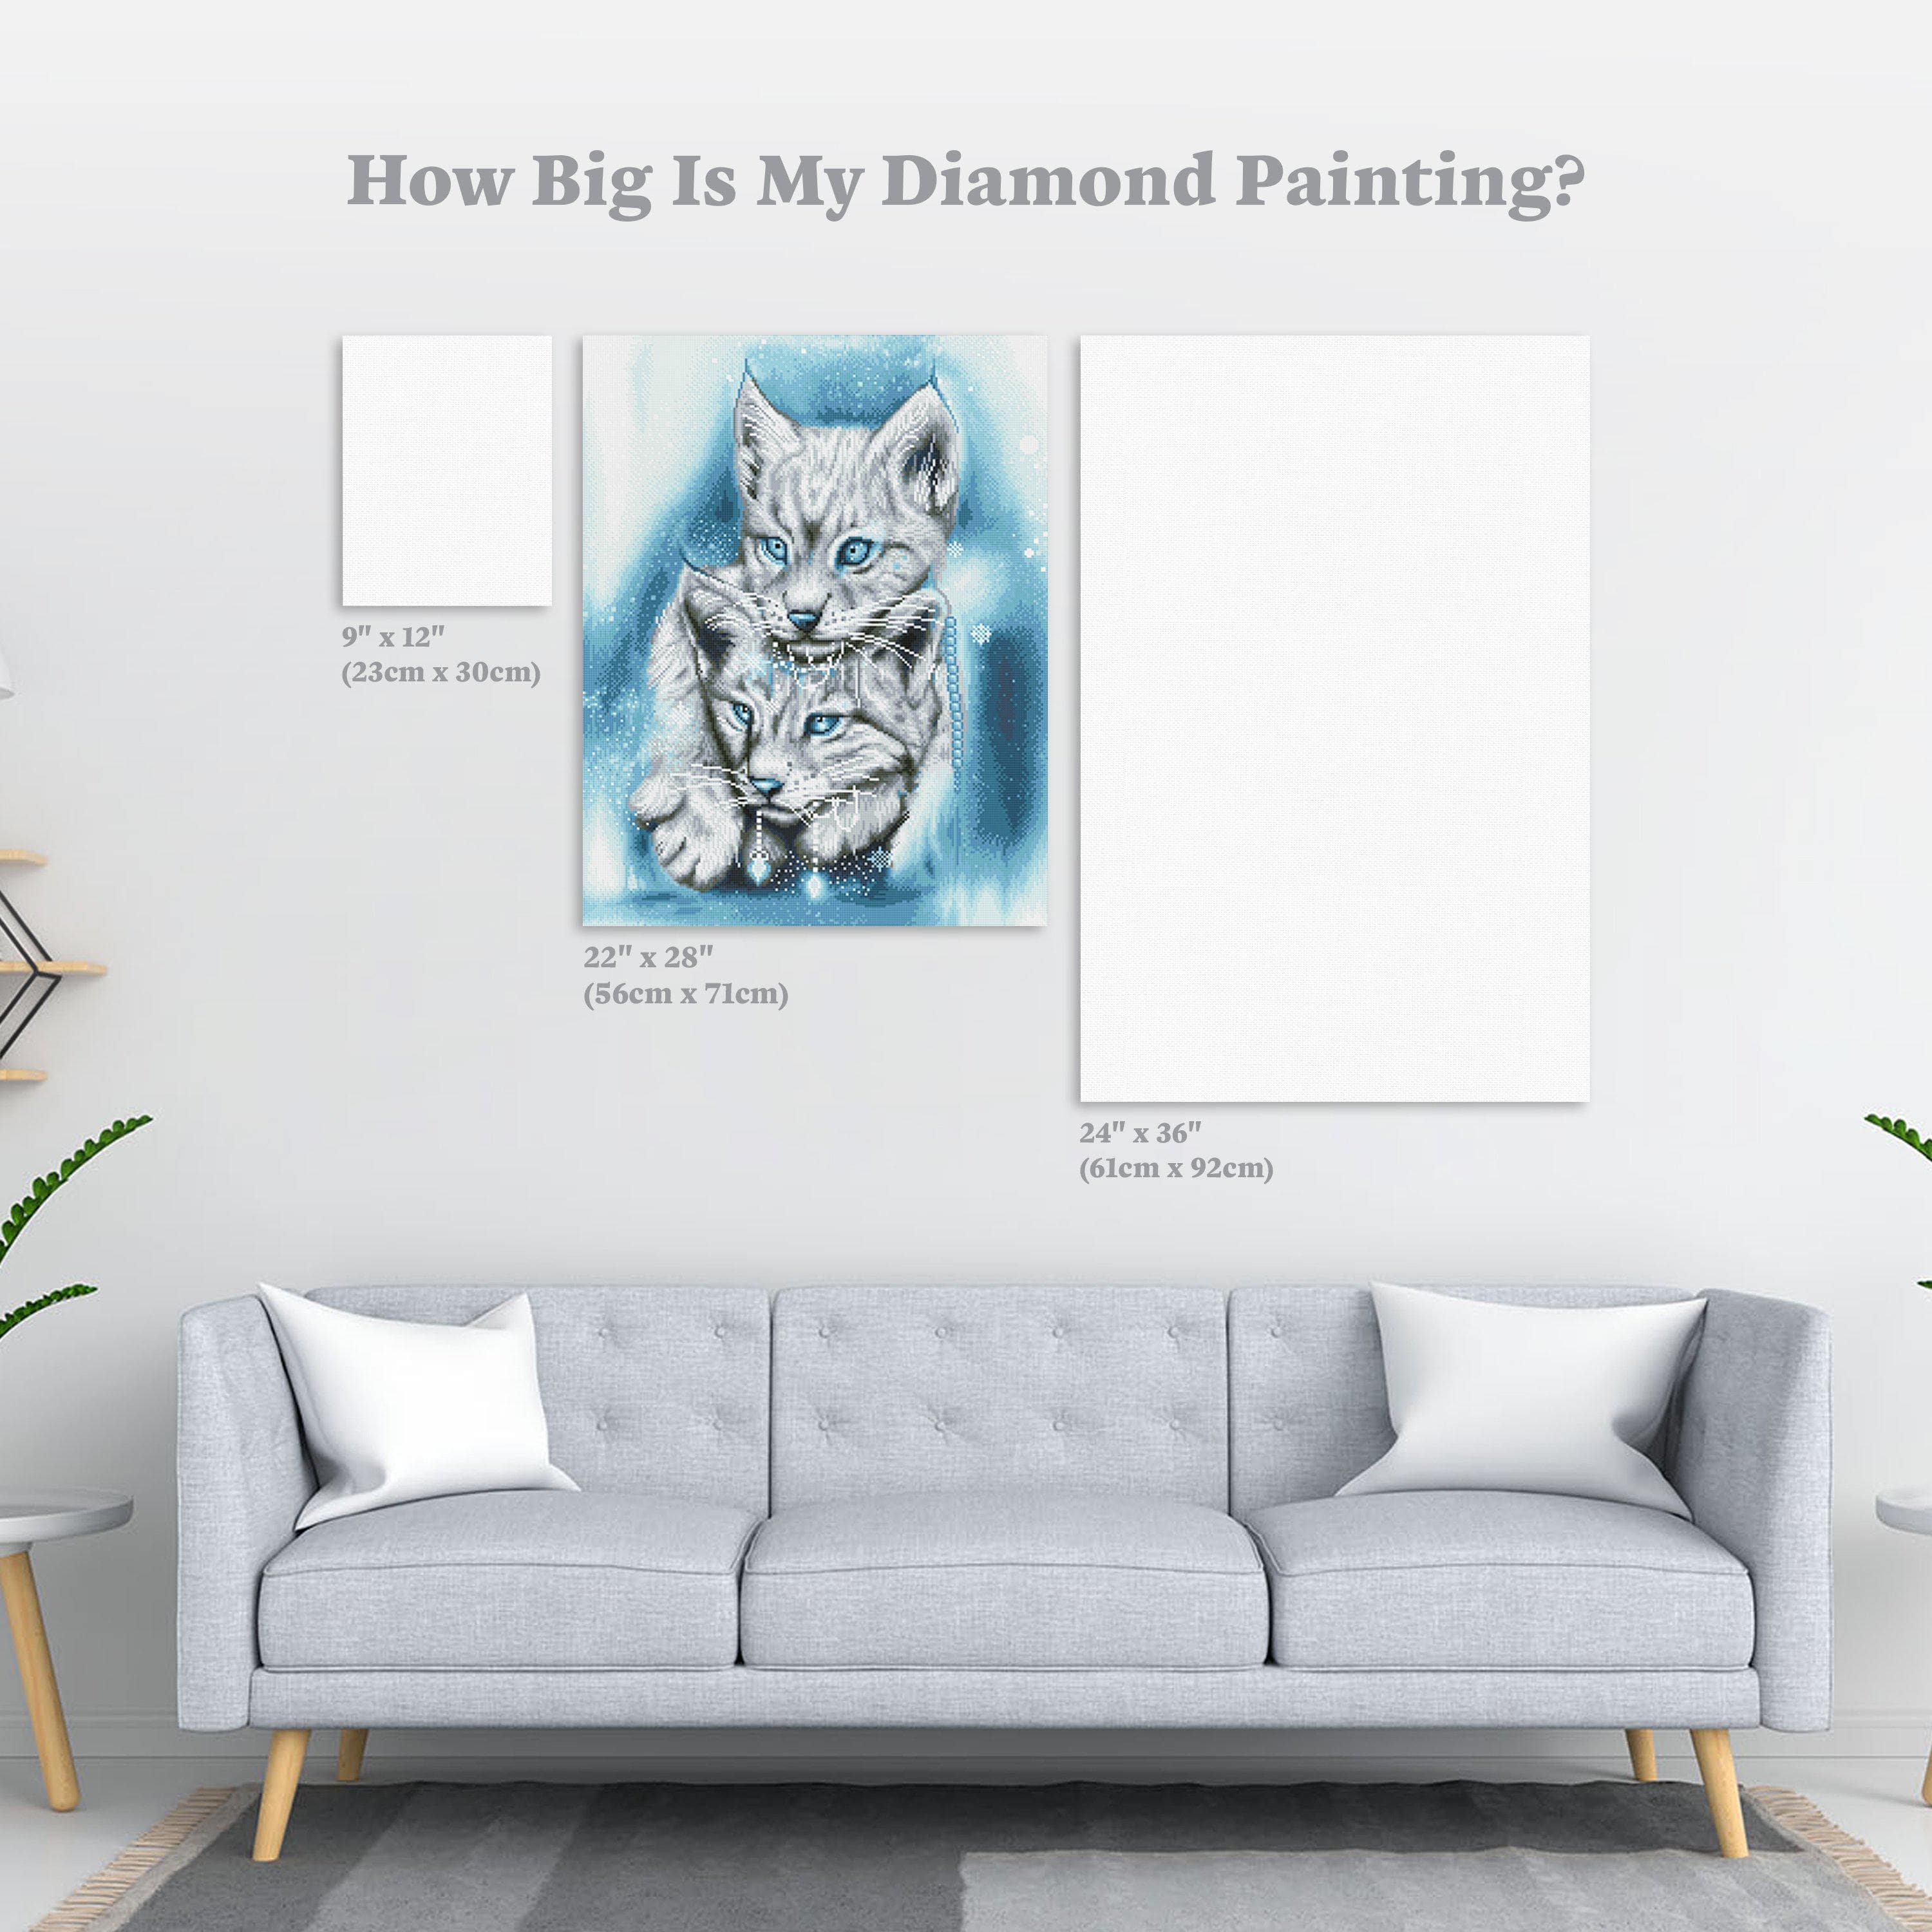 Sparkle and Create with Snowplanet Diamond Painting Kits: Blue-Cow